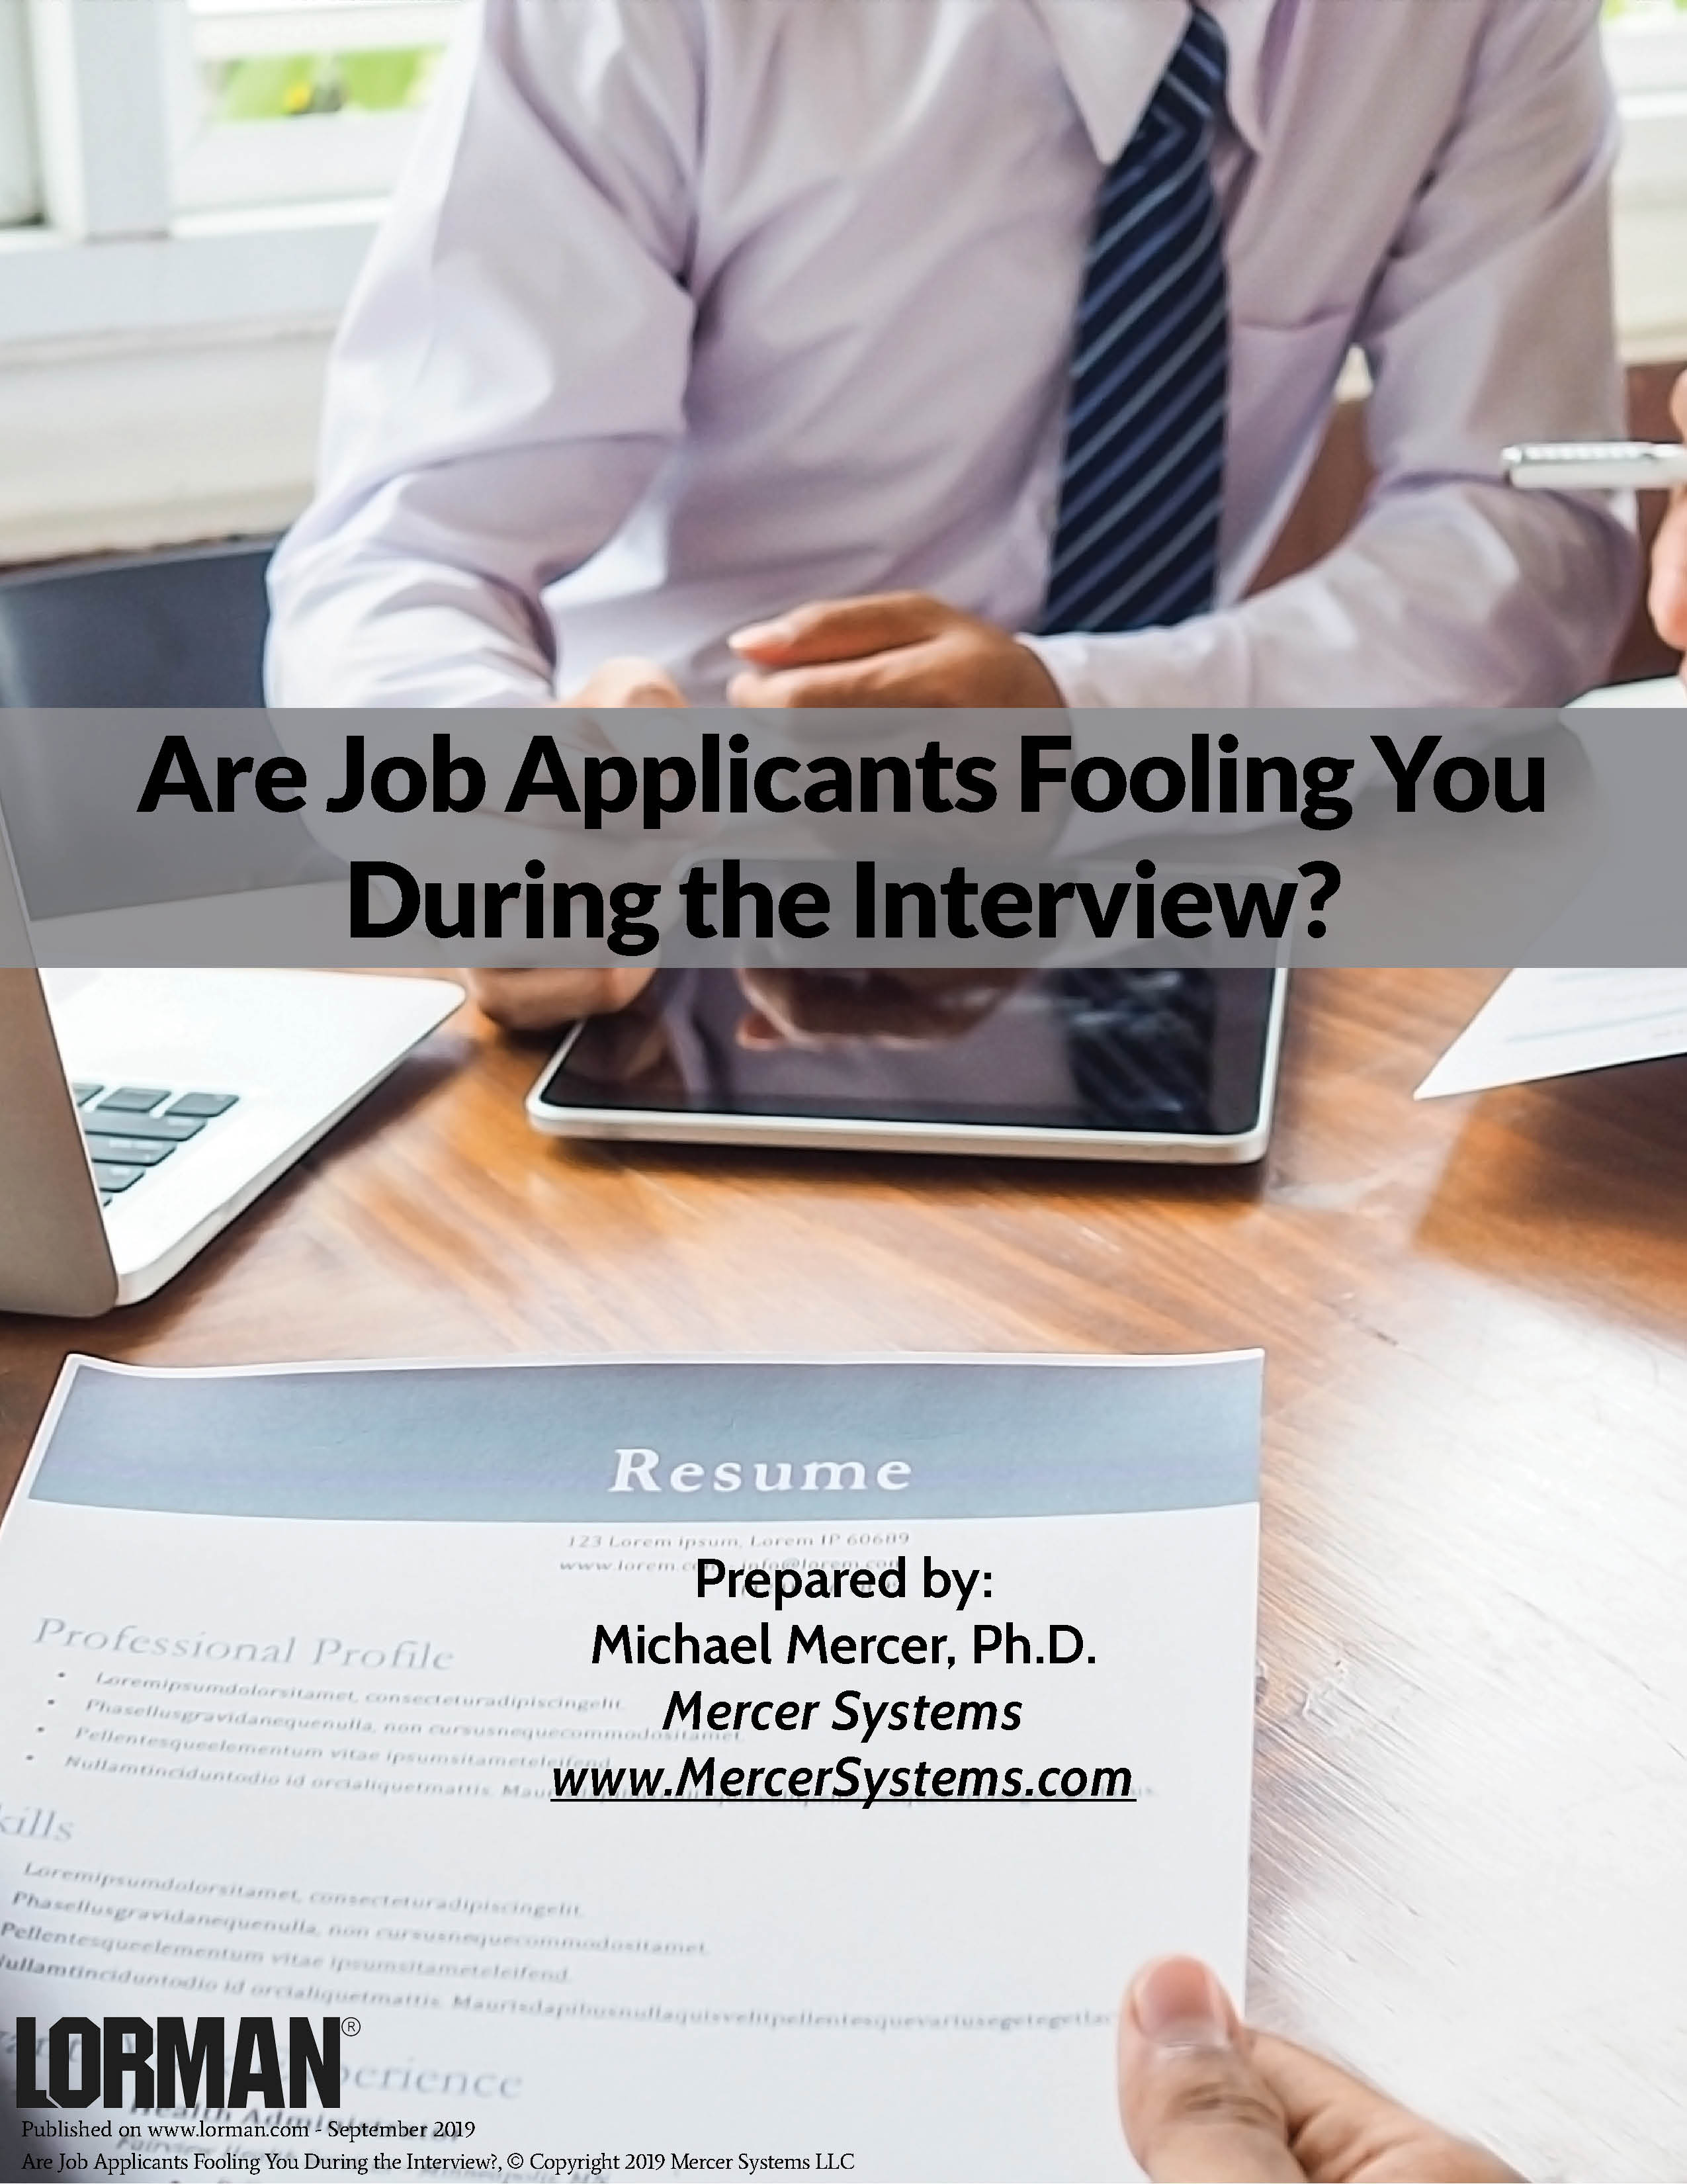 Are Job Applicants Fooling You During the Interview?